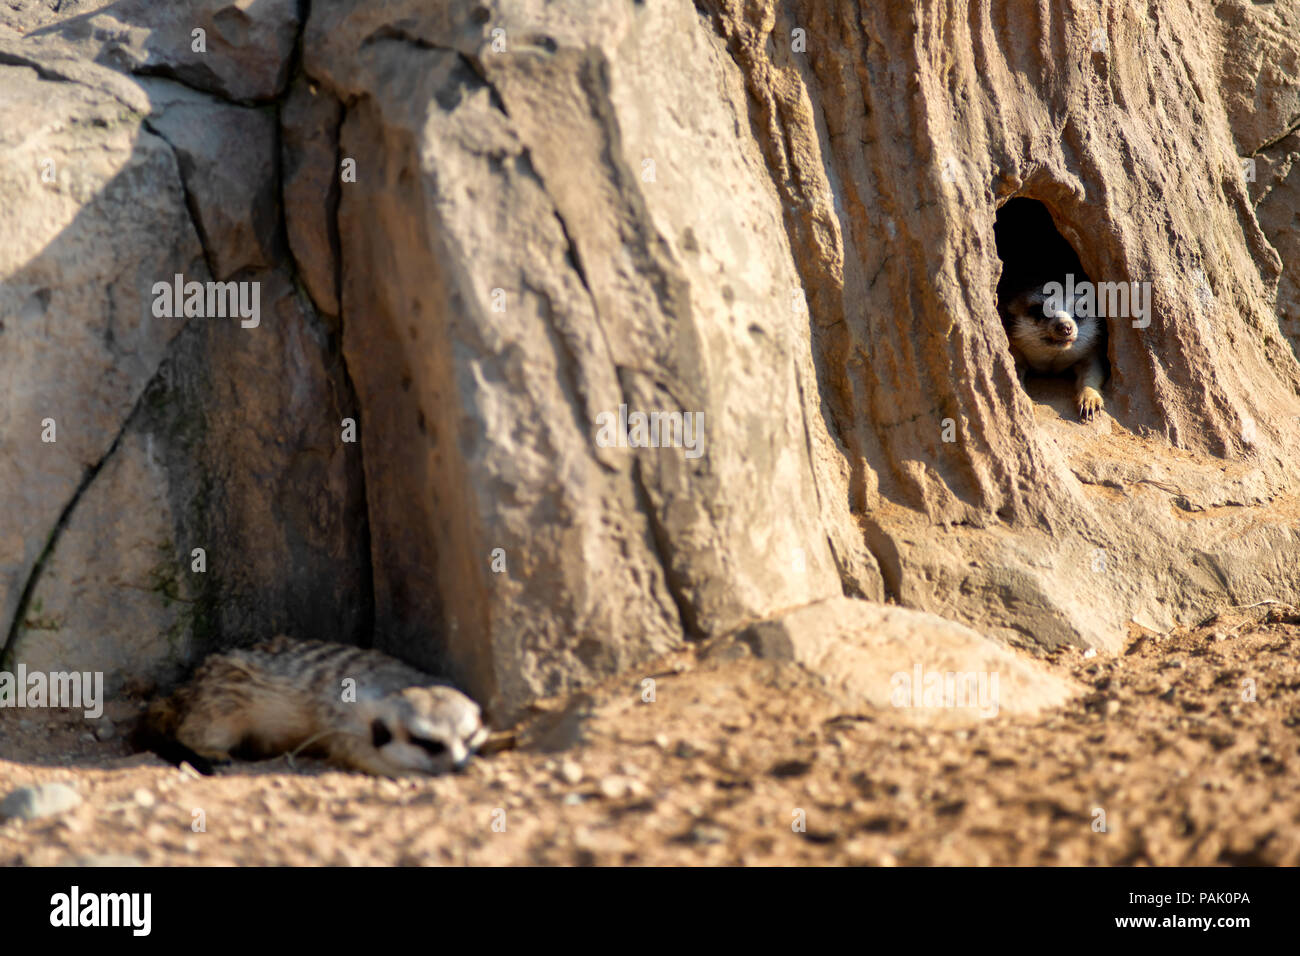 Curious and inquiring surikats or meerkats watching around hole Stock Photo